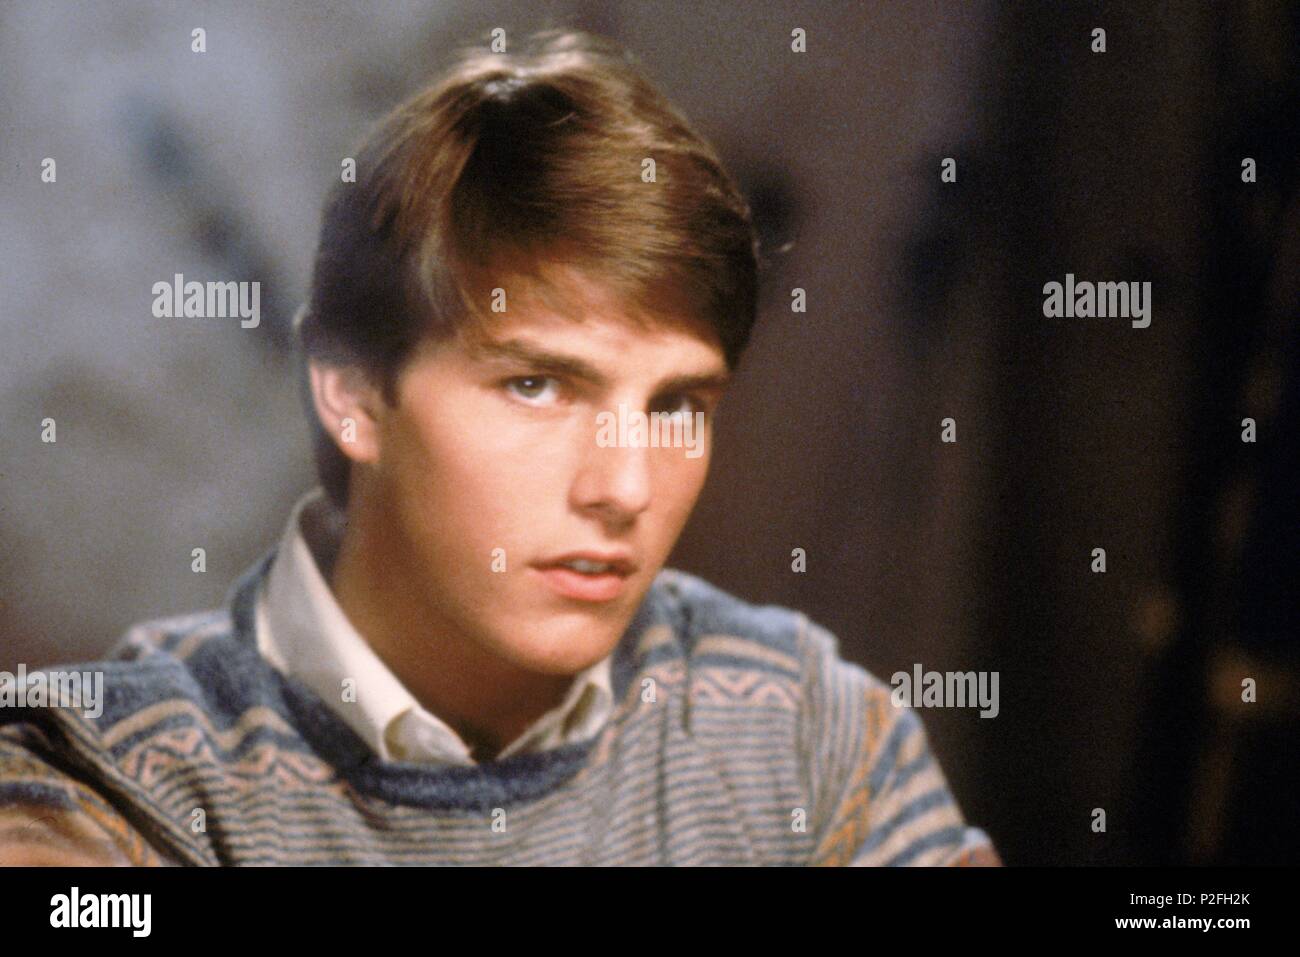 Description: RELEASE DATE: Aug 05, 1983. MOVIE TITLE: Risky Business. STUDIO: Geffen Pictures. PLOT: A suburban Chicago teenager's parents leave on vacation, and he cuts loose. An unauthorised trip in his father's Porsche means a sudden need for lots of money, which he raises in a creative way. PICTURED: TOM CRUISE as Joel Goodsen..  Original Film Title: RISKY BUSINESS.  English Title: RISKY BUSINESS.  Film Director: PAUL BRICKMAN.  Year: 1983.  Stars: TOM CRUISE. Credit: WARNER BROTHERS / Album Stock Photo